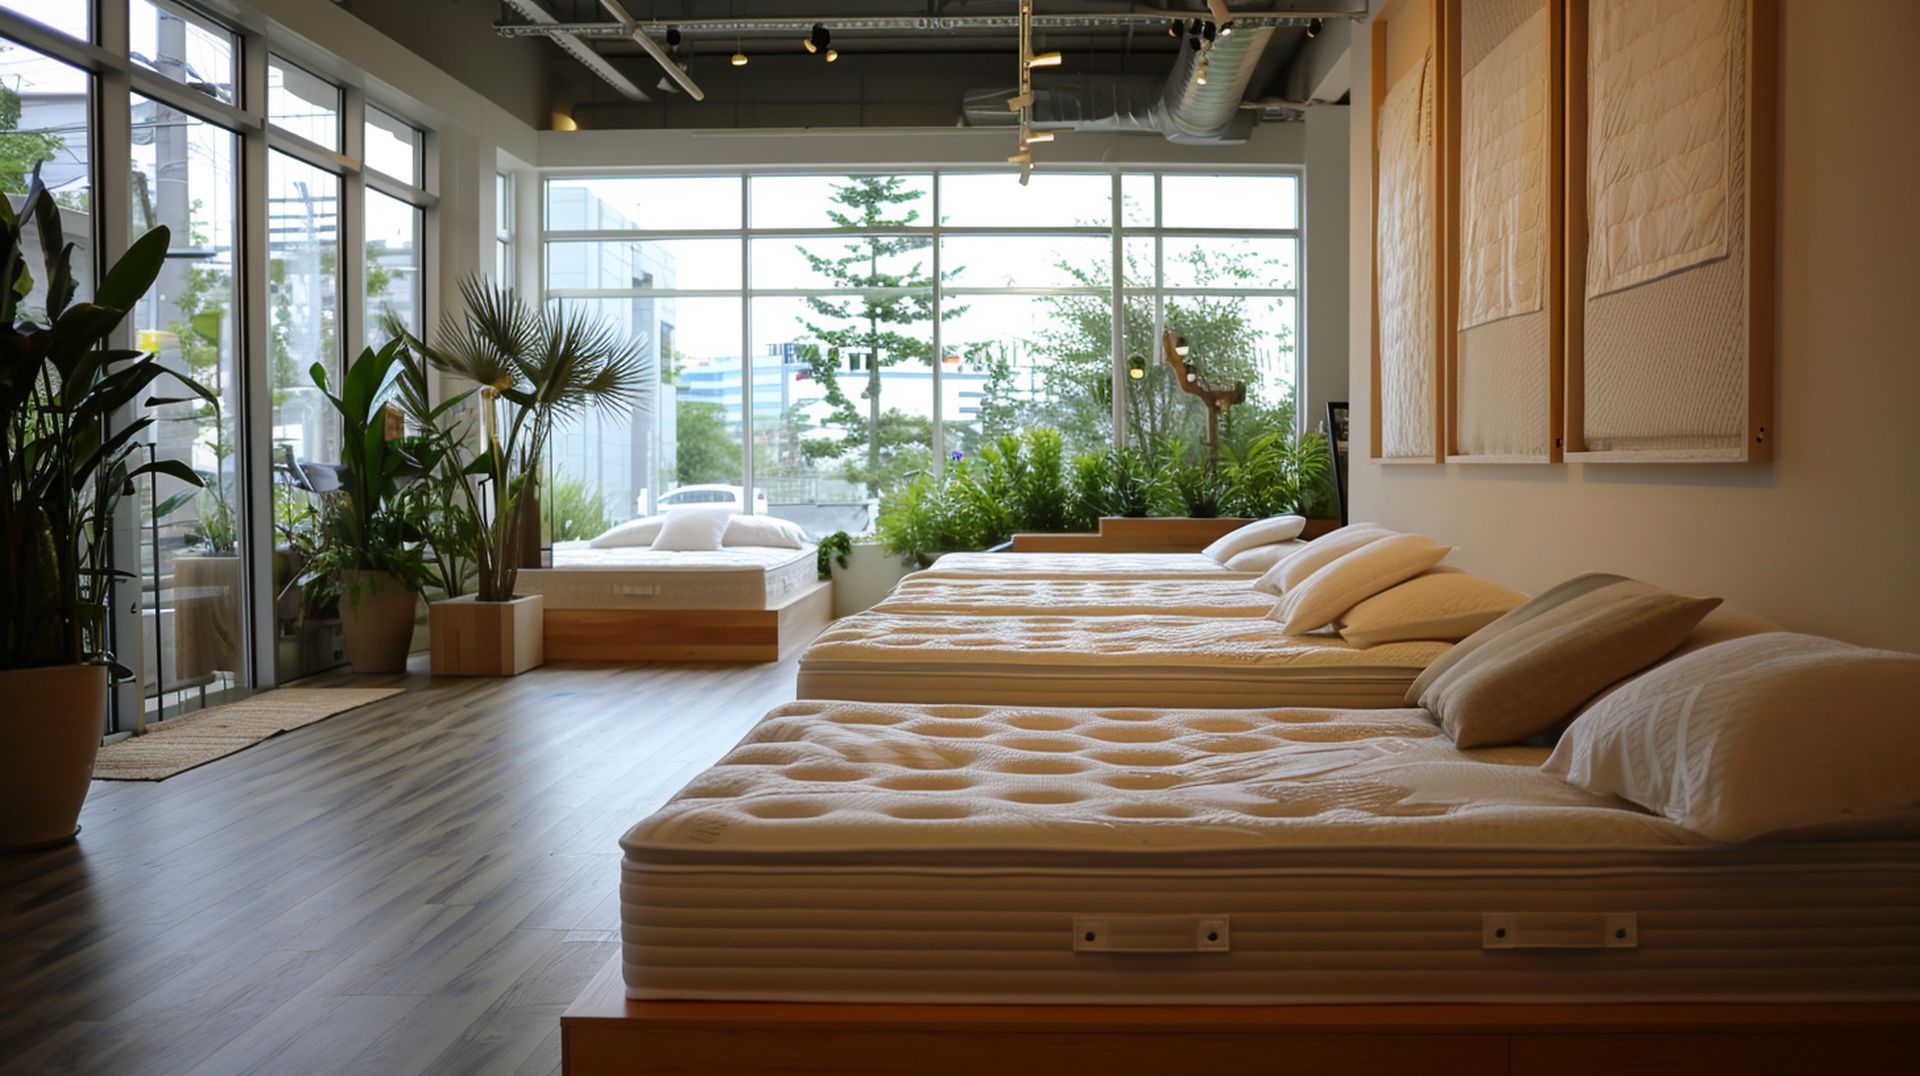 Types of mattresses at mattress dealers in Troy, MI